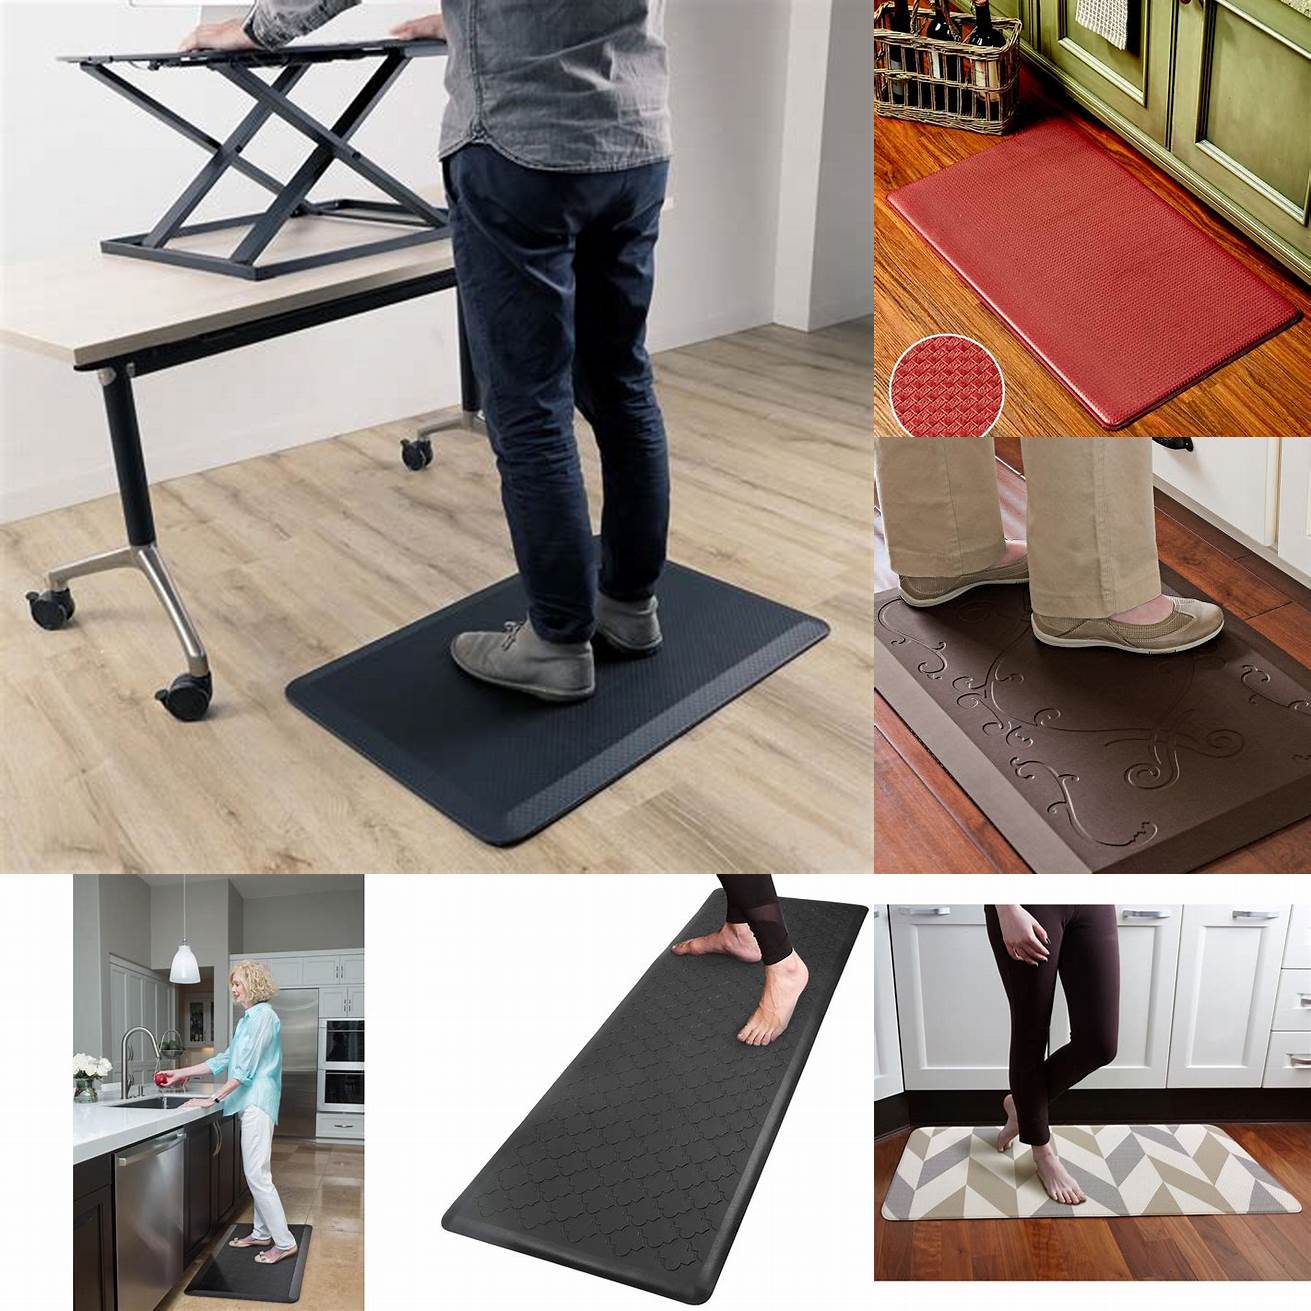 1 Provides Comfort Standing for long periods of time on a hard kitchen floor can be uncomfortable and can lead to foot and leg pain A kitchen mat provides cushioning and reduces the pressure on your feet and legs making it more comfortable to stand